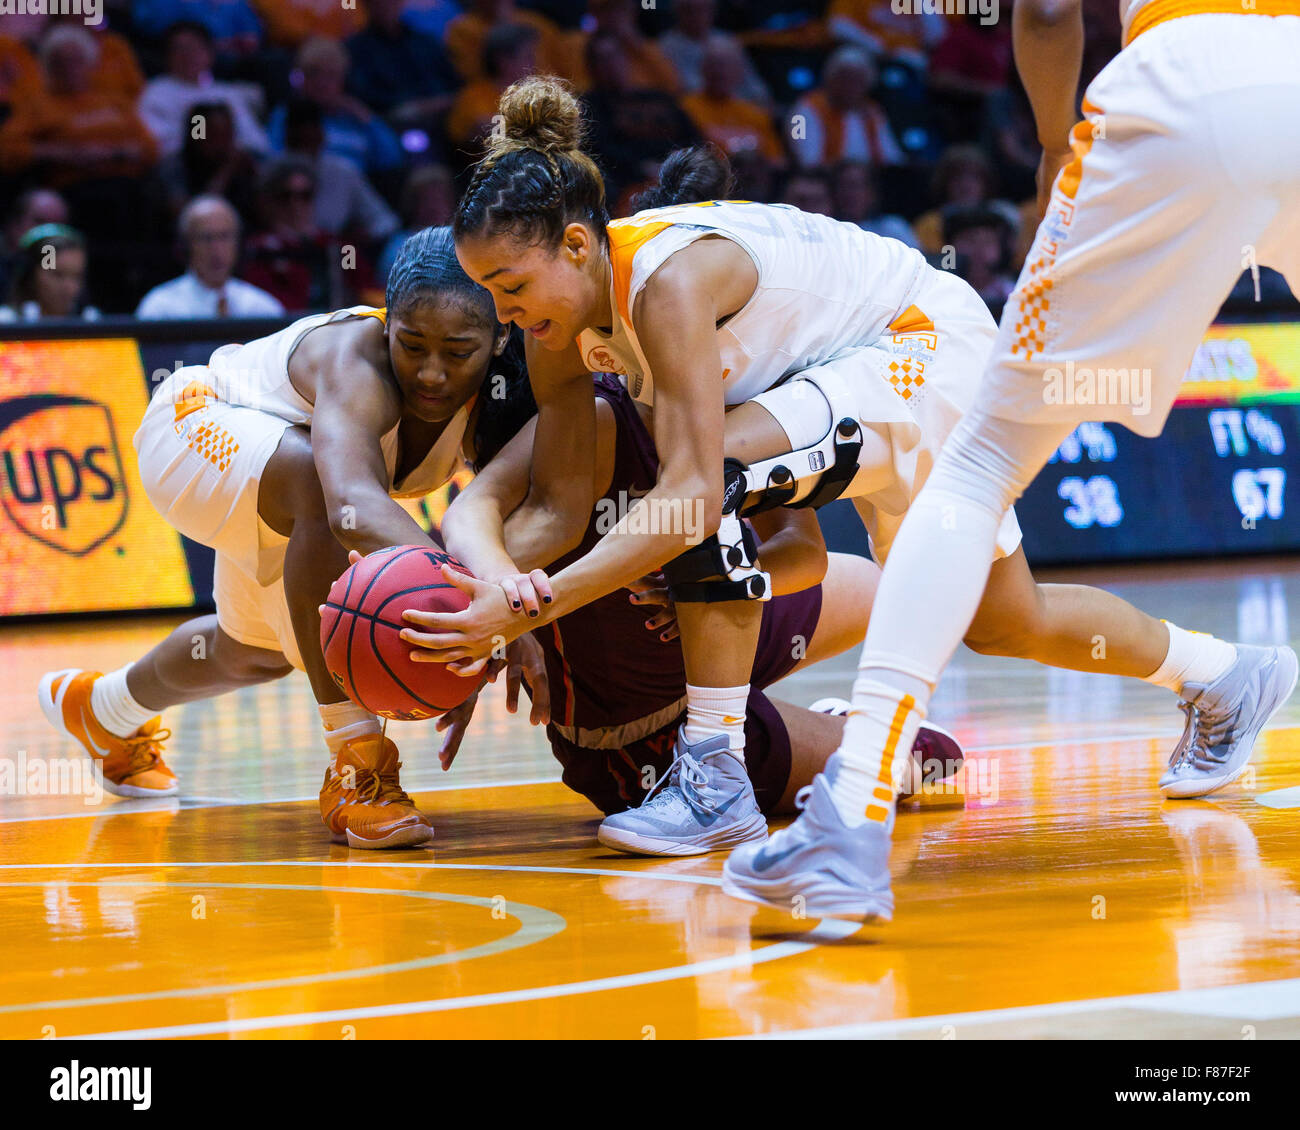 December 6, 2015: Andraya Carter #14 of the Tennessee Lady Volunteers fights for a loose ball during the NCAA basketball game between the University of Tennessee Lady Volunteers and the Virginia Tech Hokies at Thompson Boling Arena in Knoxville TN Tim Gangloff/CSM Stock Photo